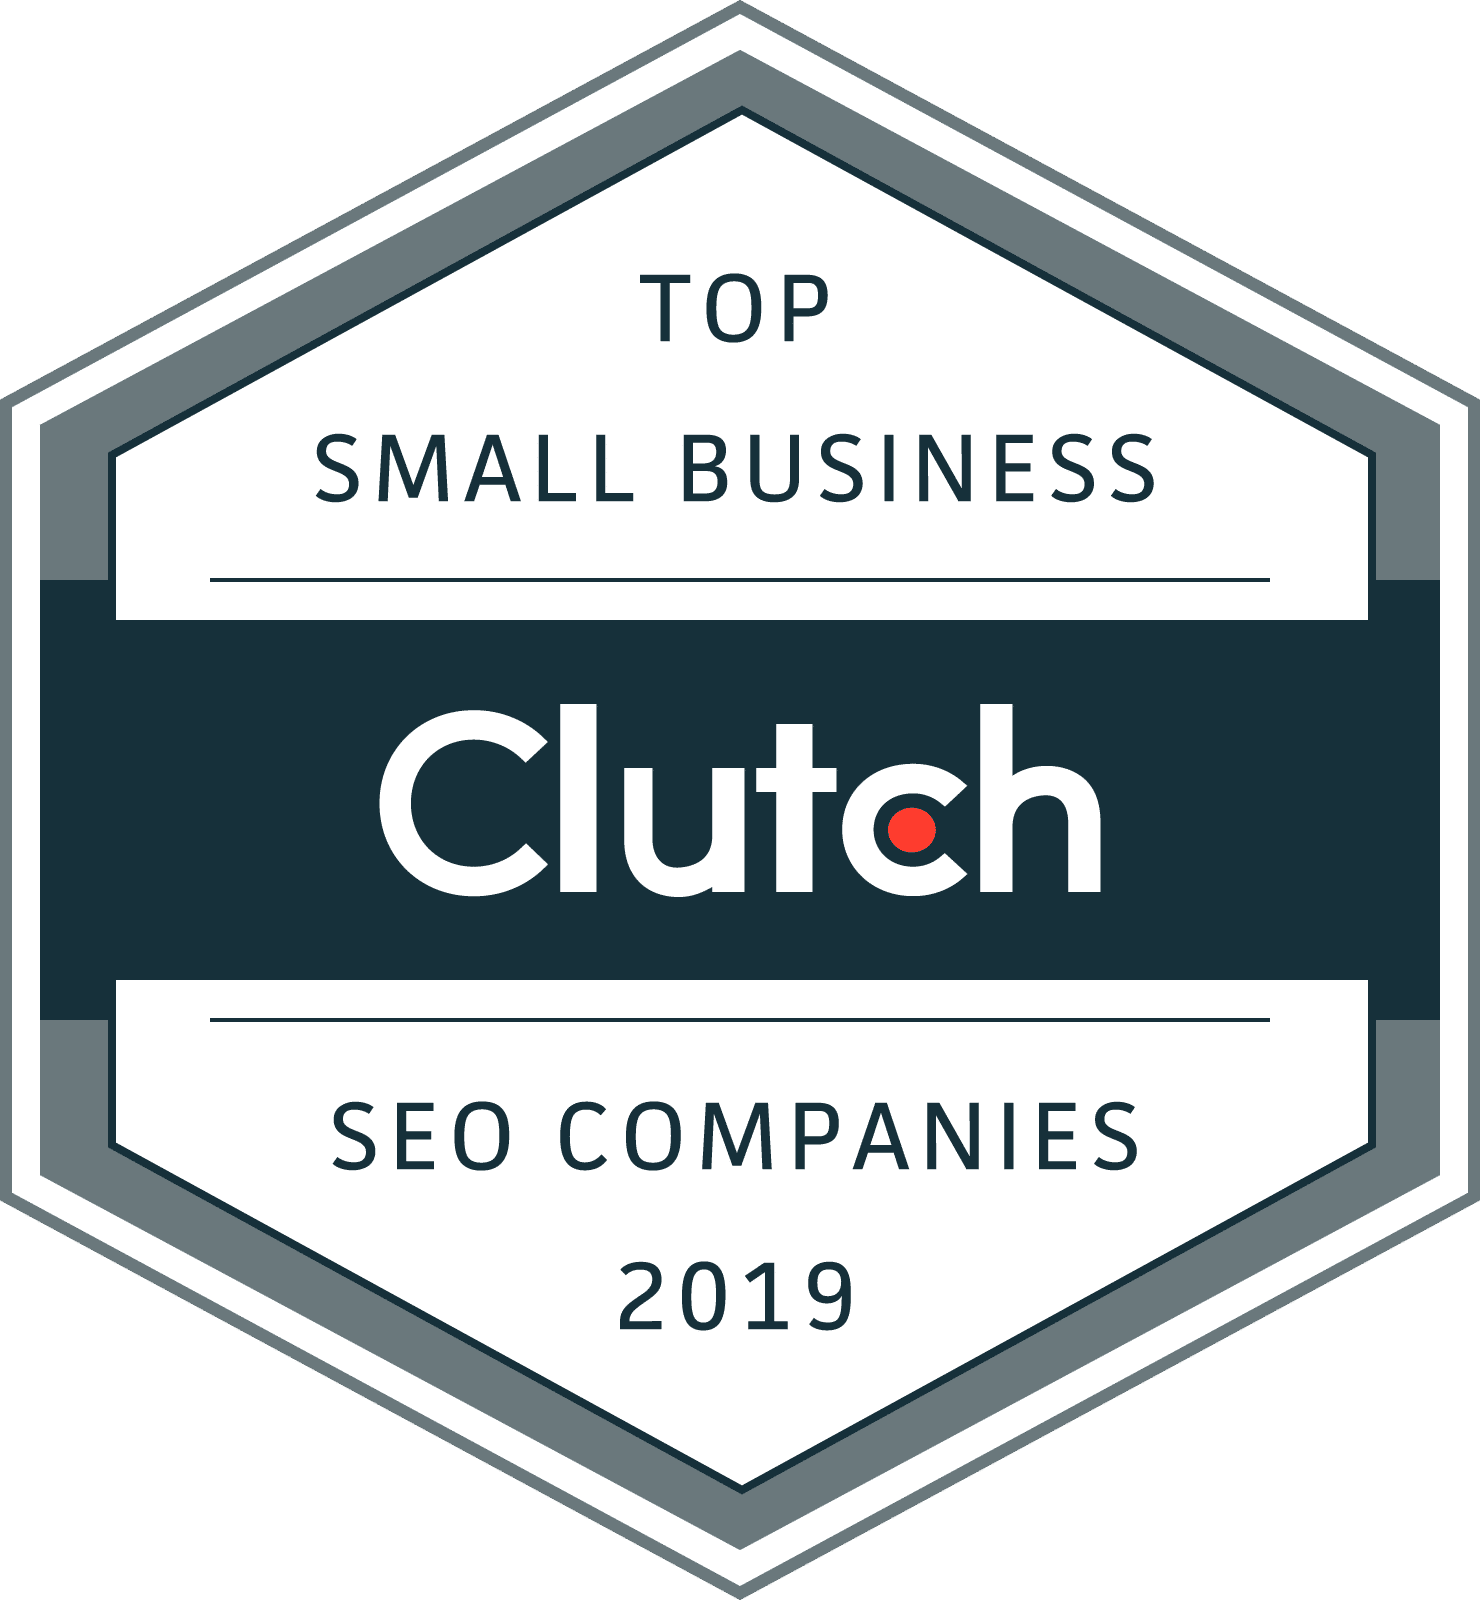 W3 Affinity recognized as top small business SEO company & local SEO company